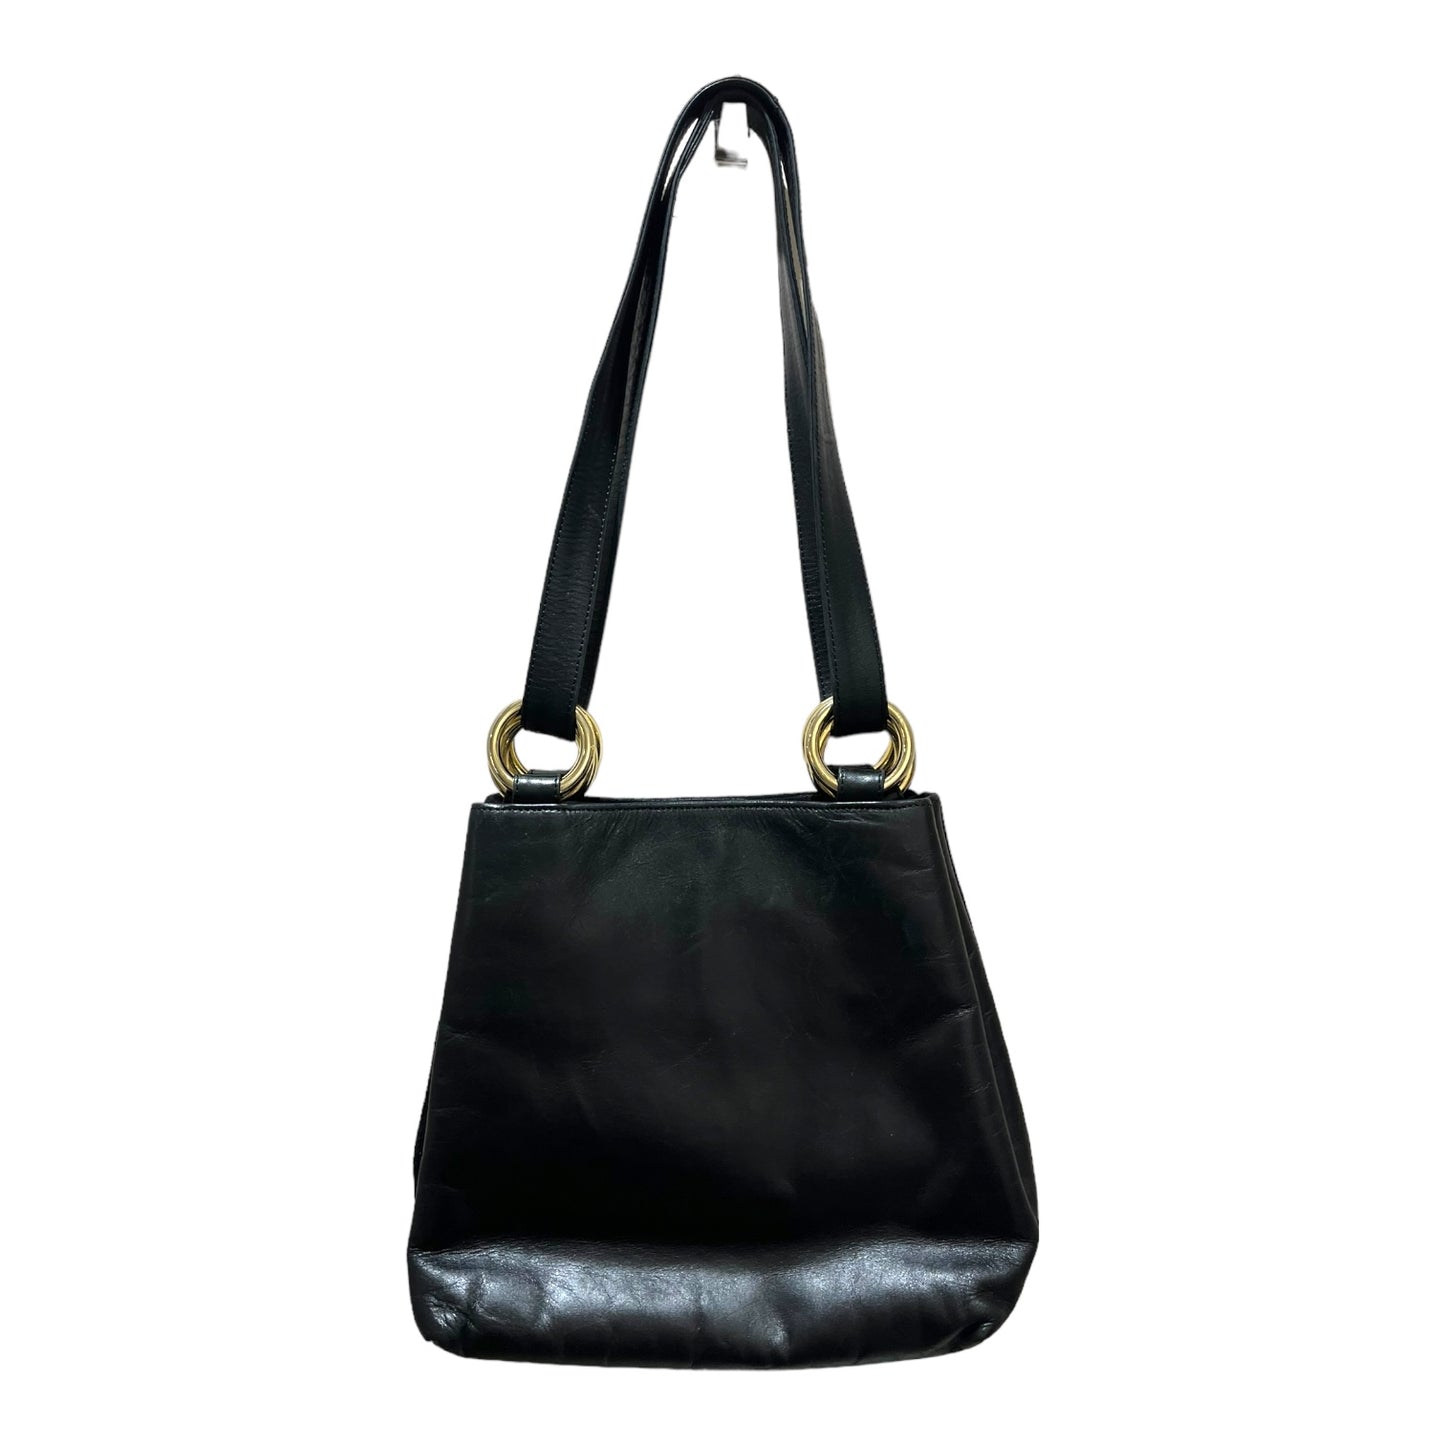 Russell & Bromley Black Leather and Suede Bag